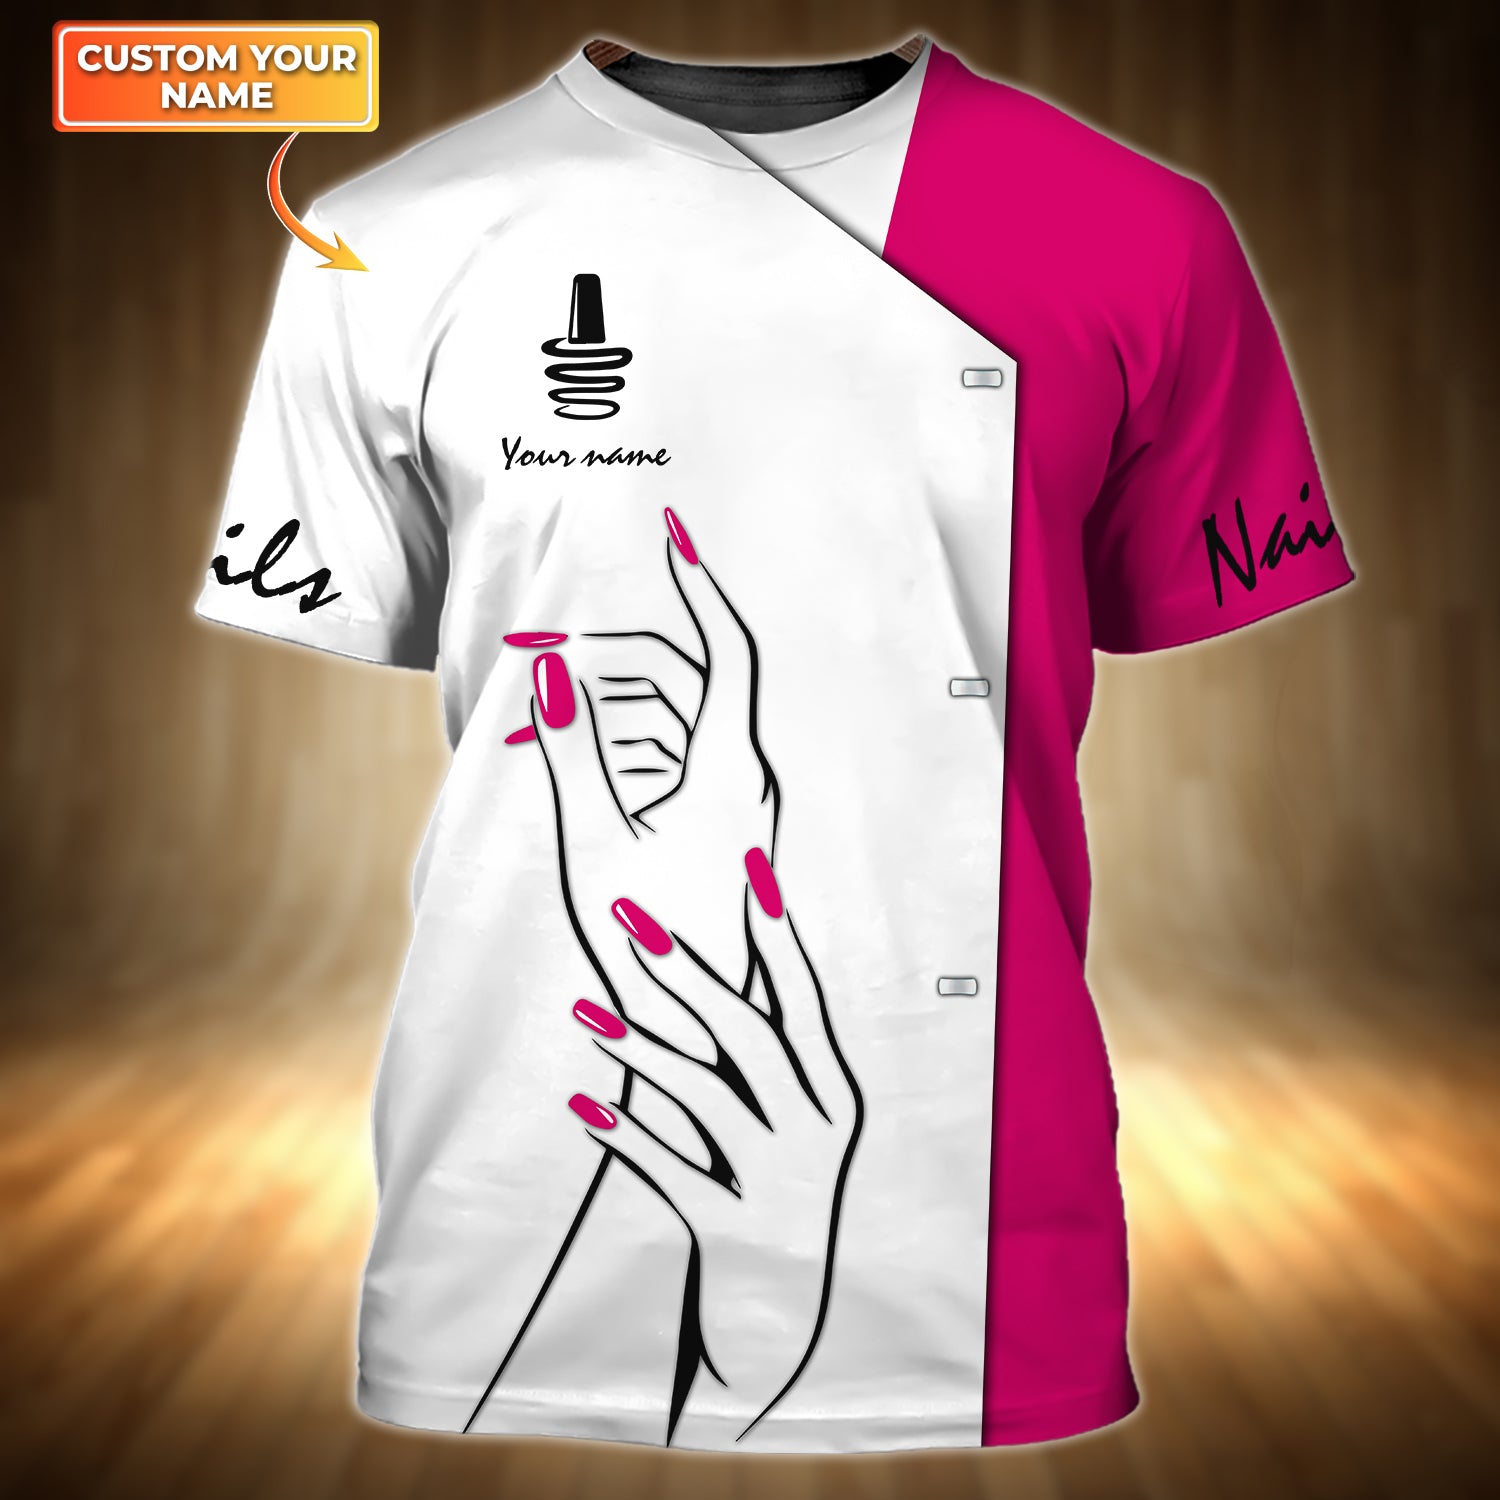 Personalized 3D Tshirt Nail Technician Shirts Manicurist Gift/ White & Pink Tad Shirt For Her Him